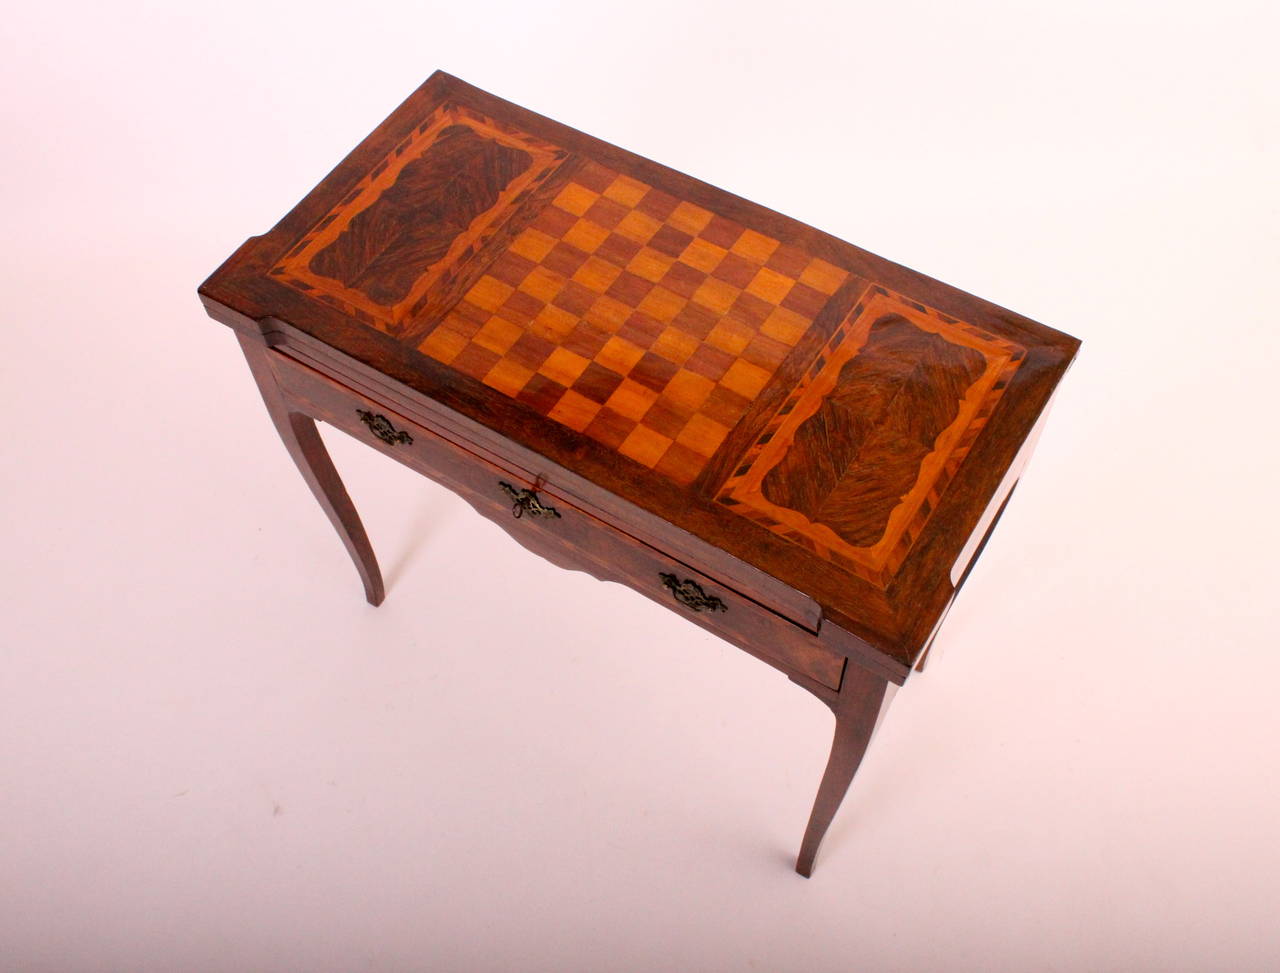 With a box wood and other woods inlaid top showing a chess board that opens to a card table. 
D. Maria I Period table (Queen of Portugal, 1777-1816).